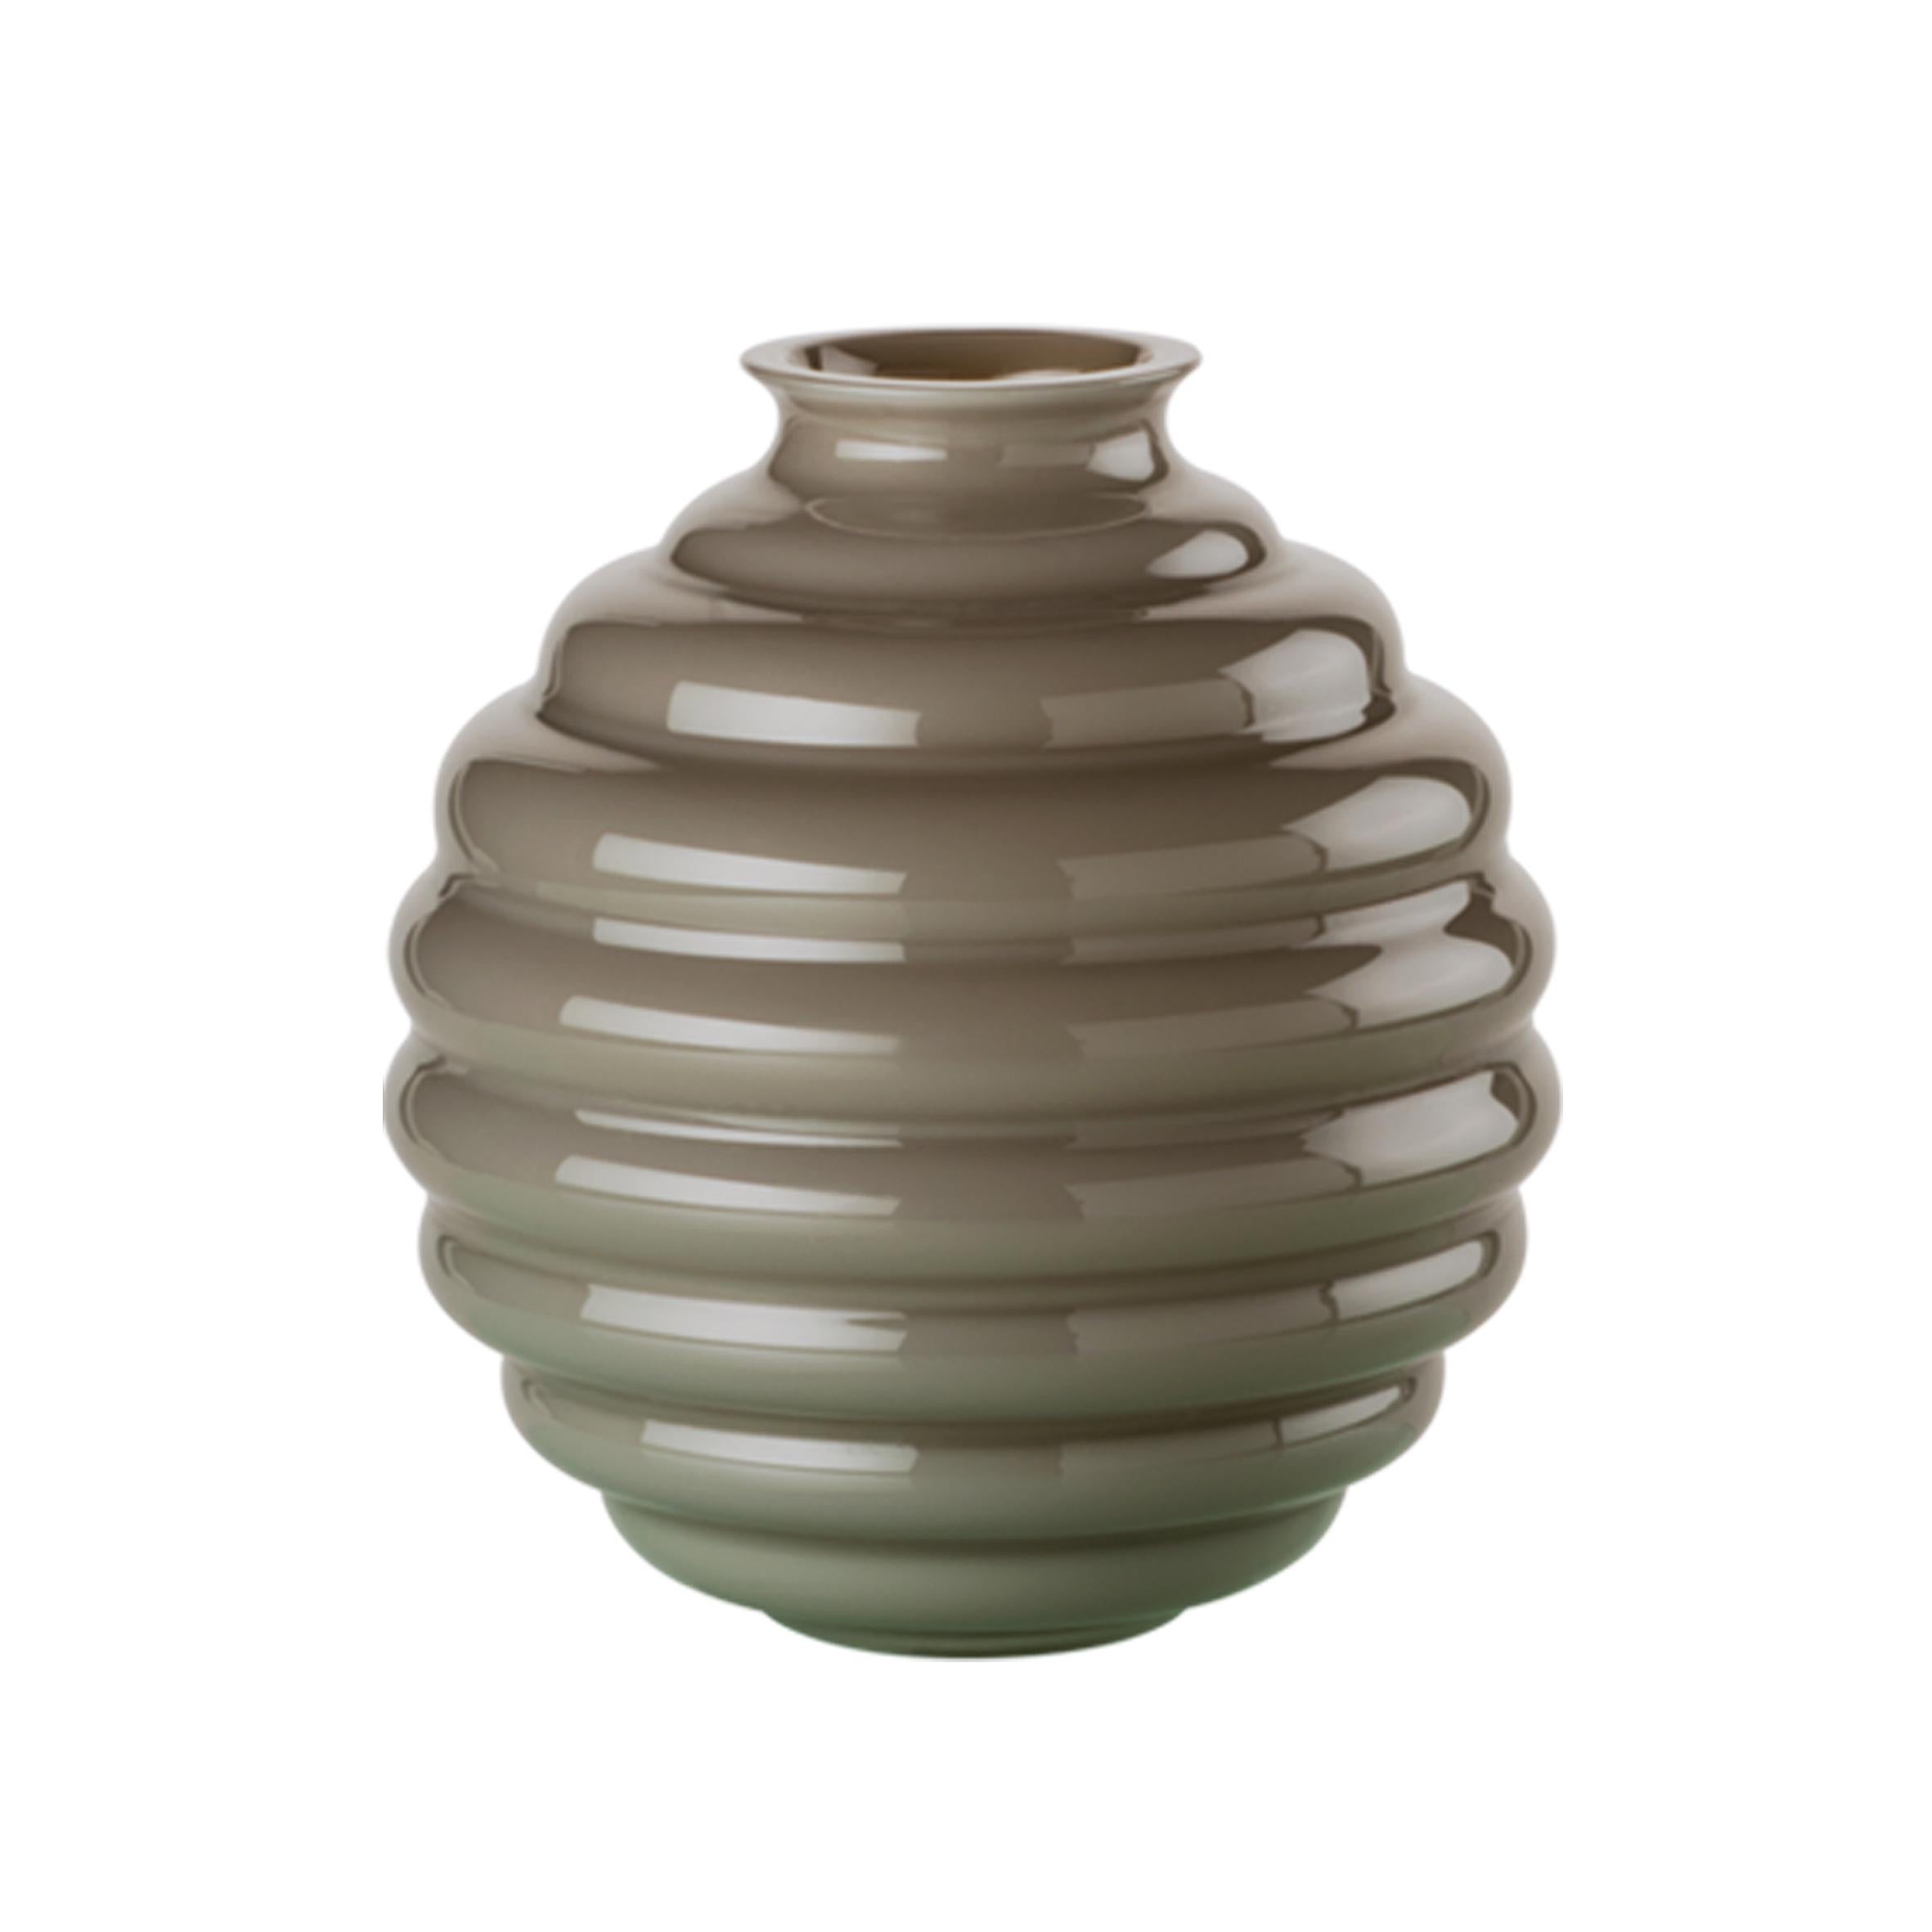 Venini glass vase in grey designed by Napoleone Martinuzzi in 1930. Perfect for indoor home decor as container or statement piece for any room. Also available in other colors on 1stdibs.

Dimensions: 26 cm diameter x 29 cm height.